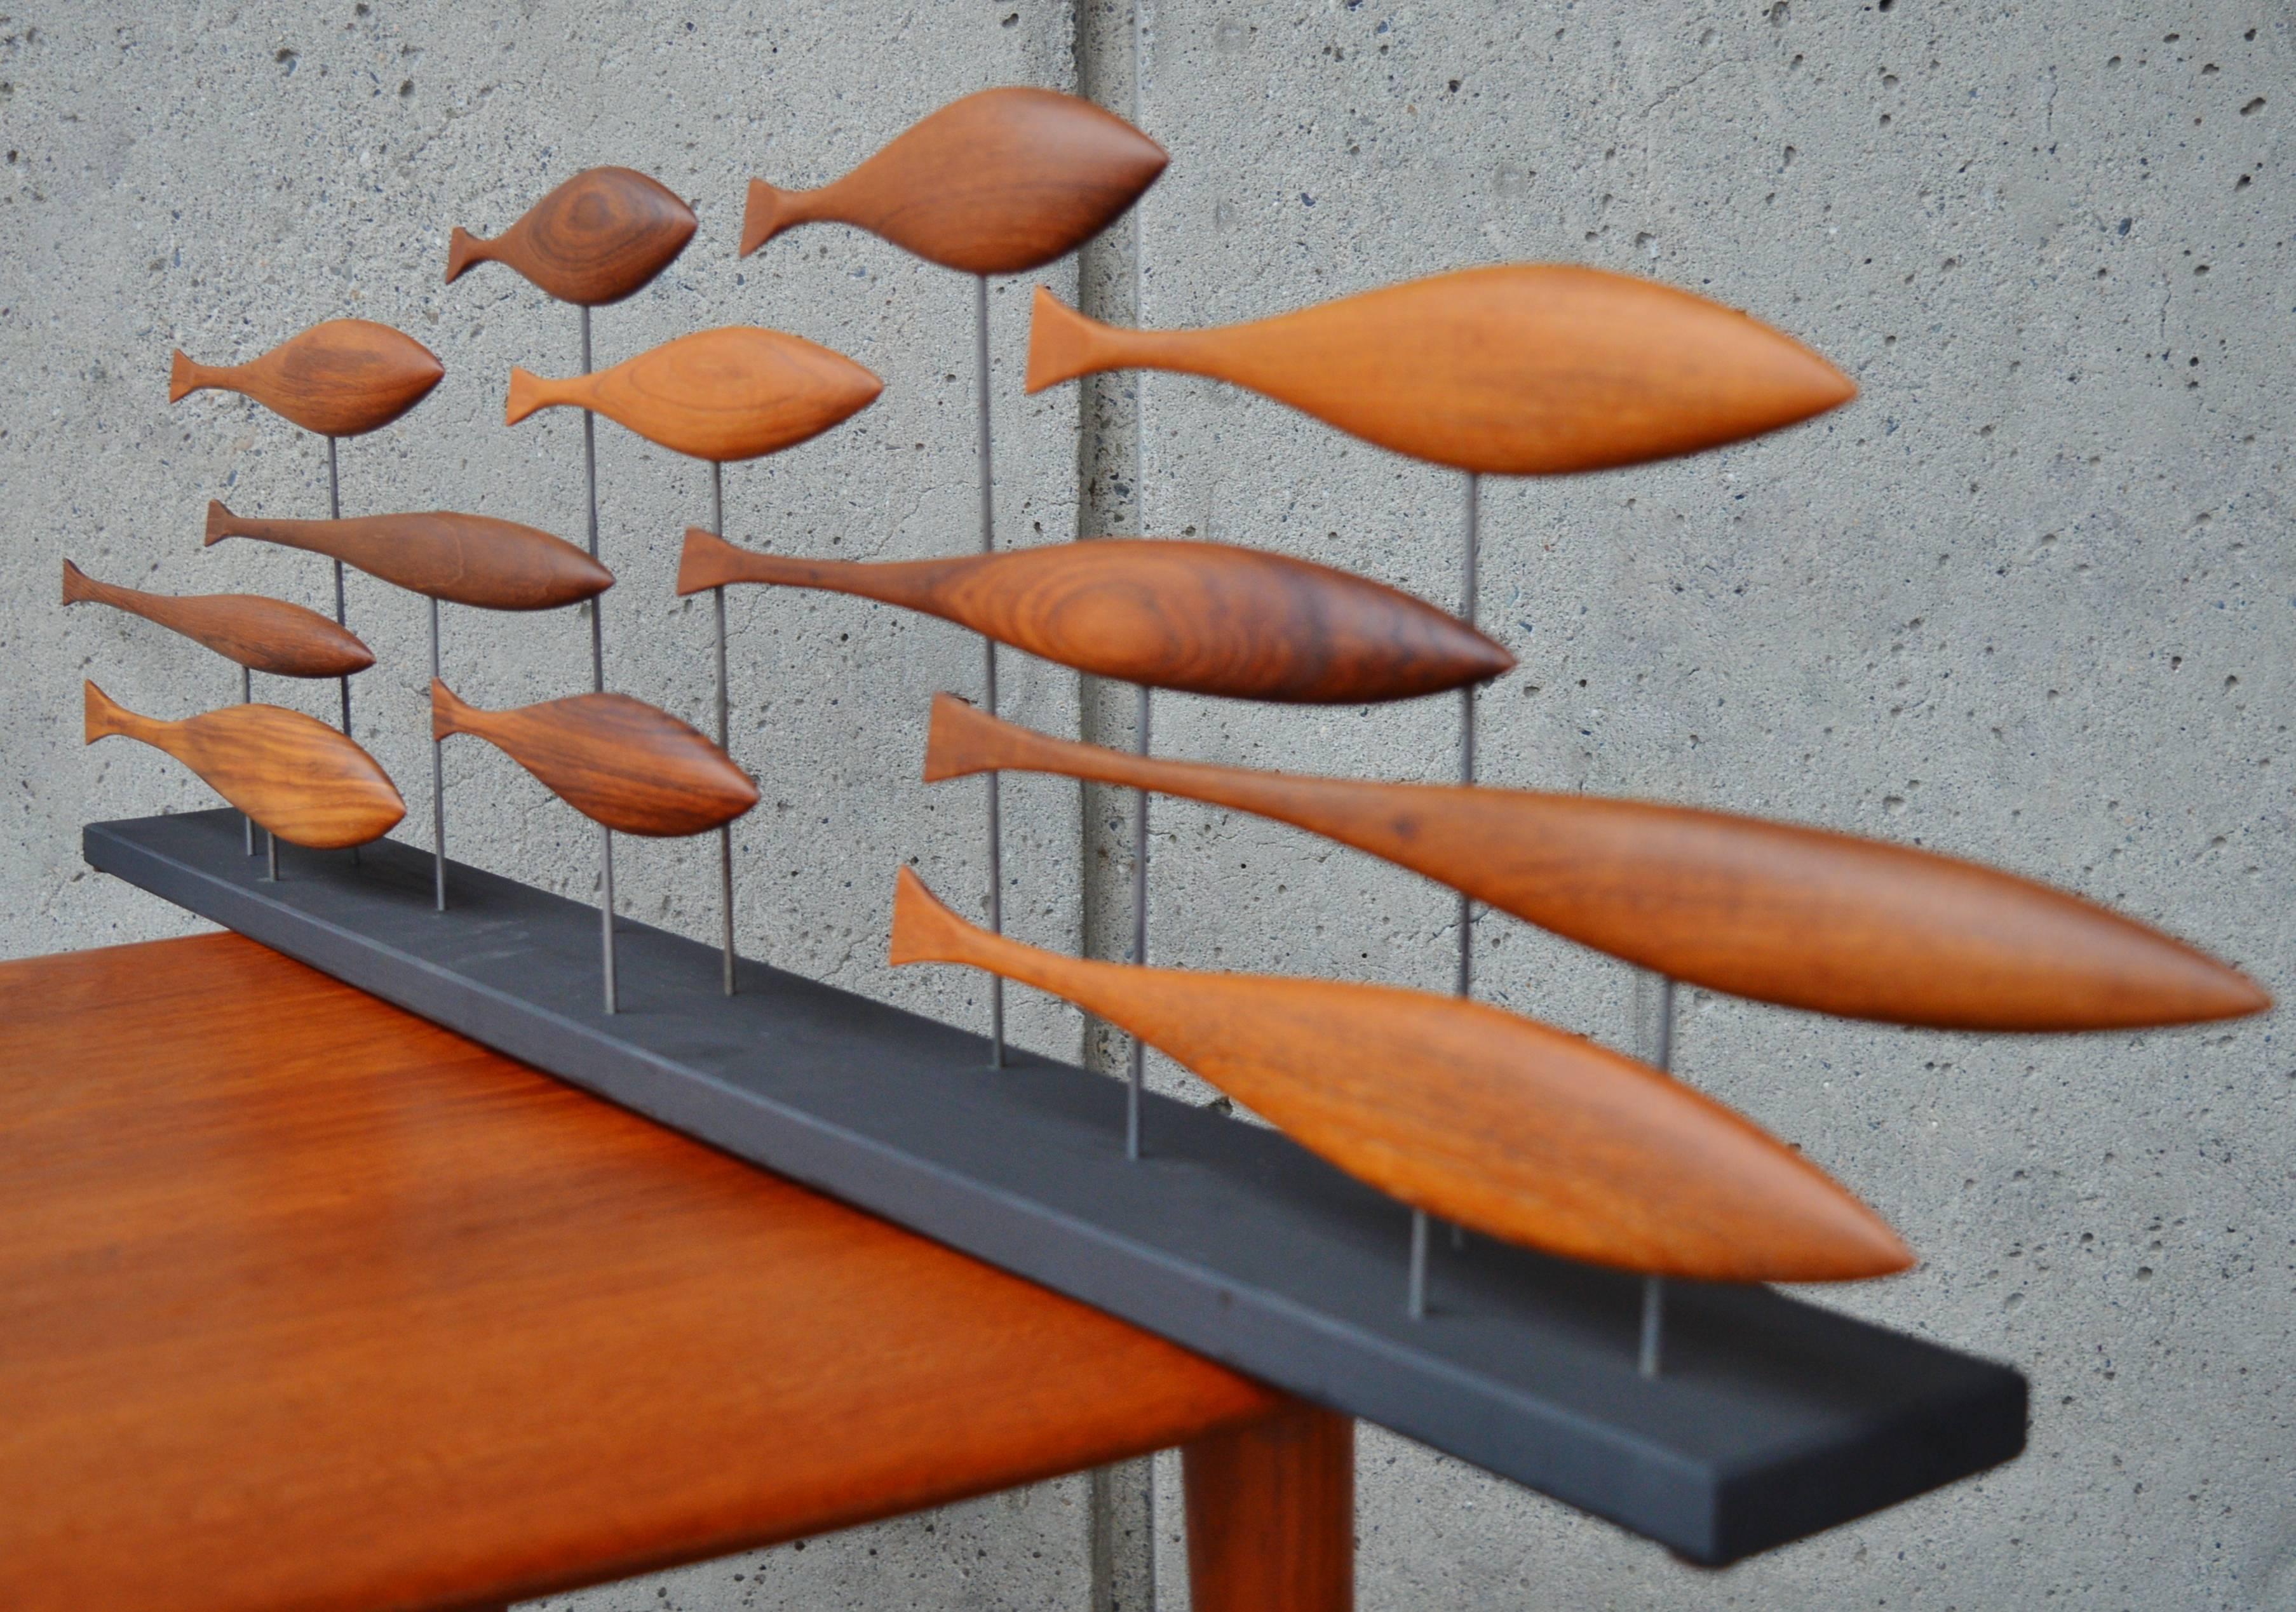 Vancouver BC artist, Tyler Fritz has always had a love of Danish Modern teak and walnut Mid-Century furniture. Coming across pieces that have been destroyed beyond being restored, he decided to salvage and carve the hardwood remnants into delightful